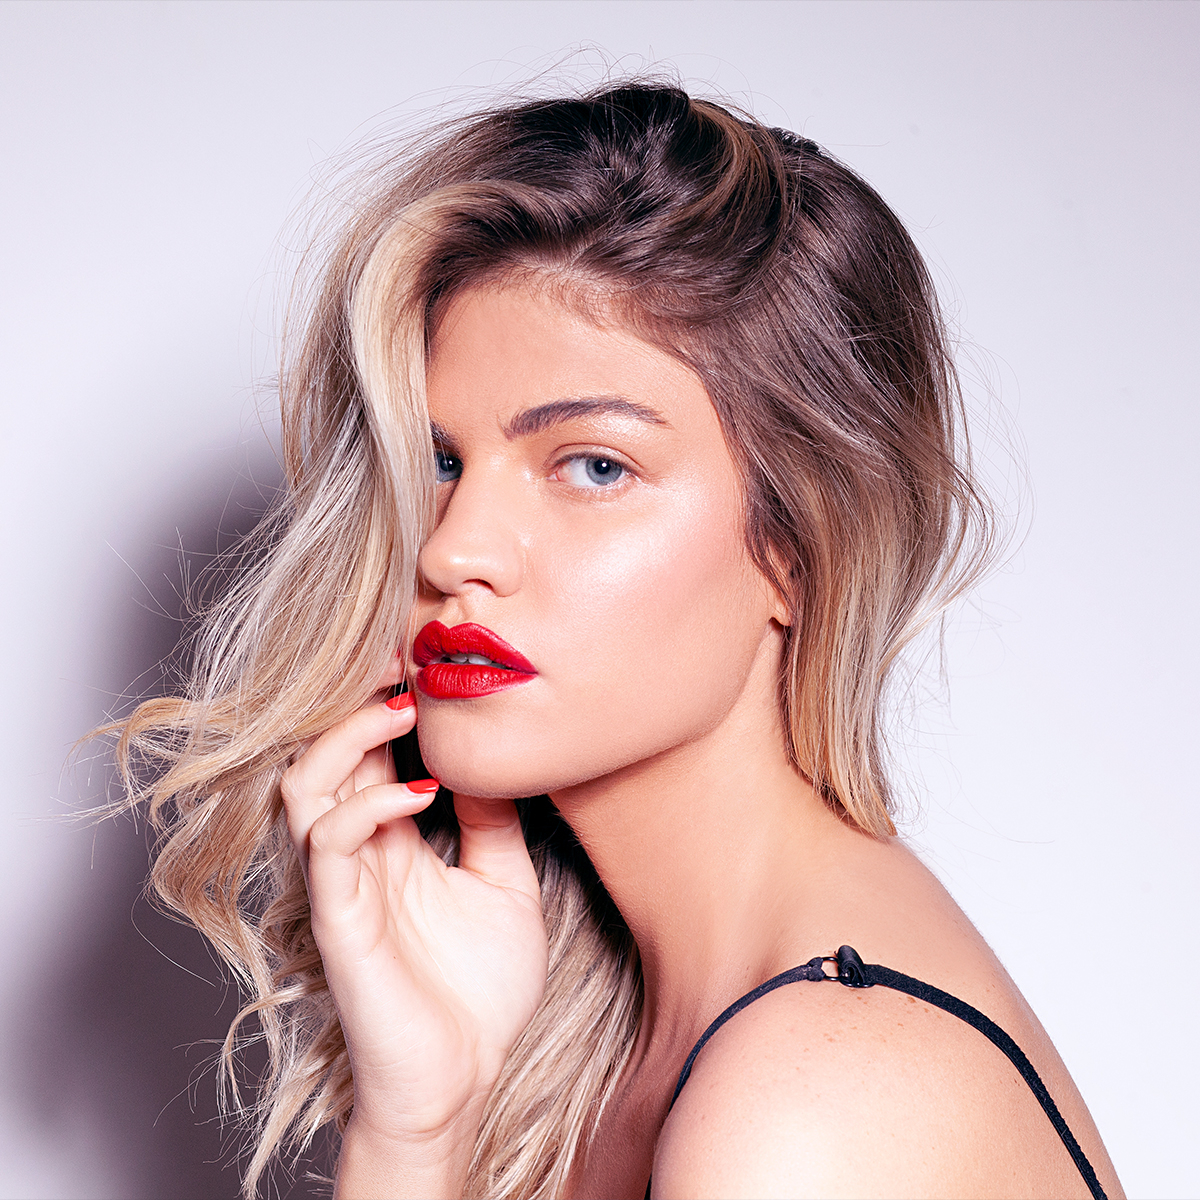 Beautiful Blonde Woman With Red Lipstick And Classic Fashion Style